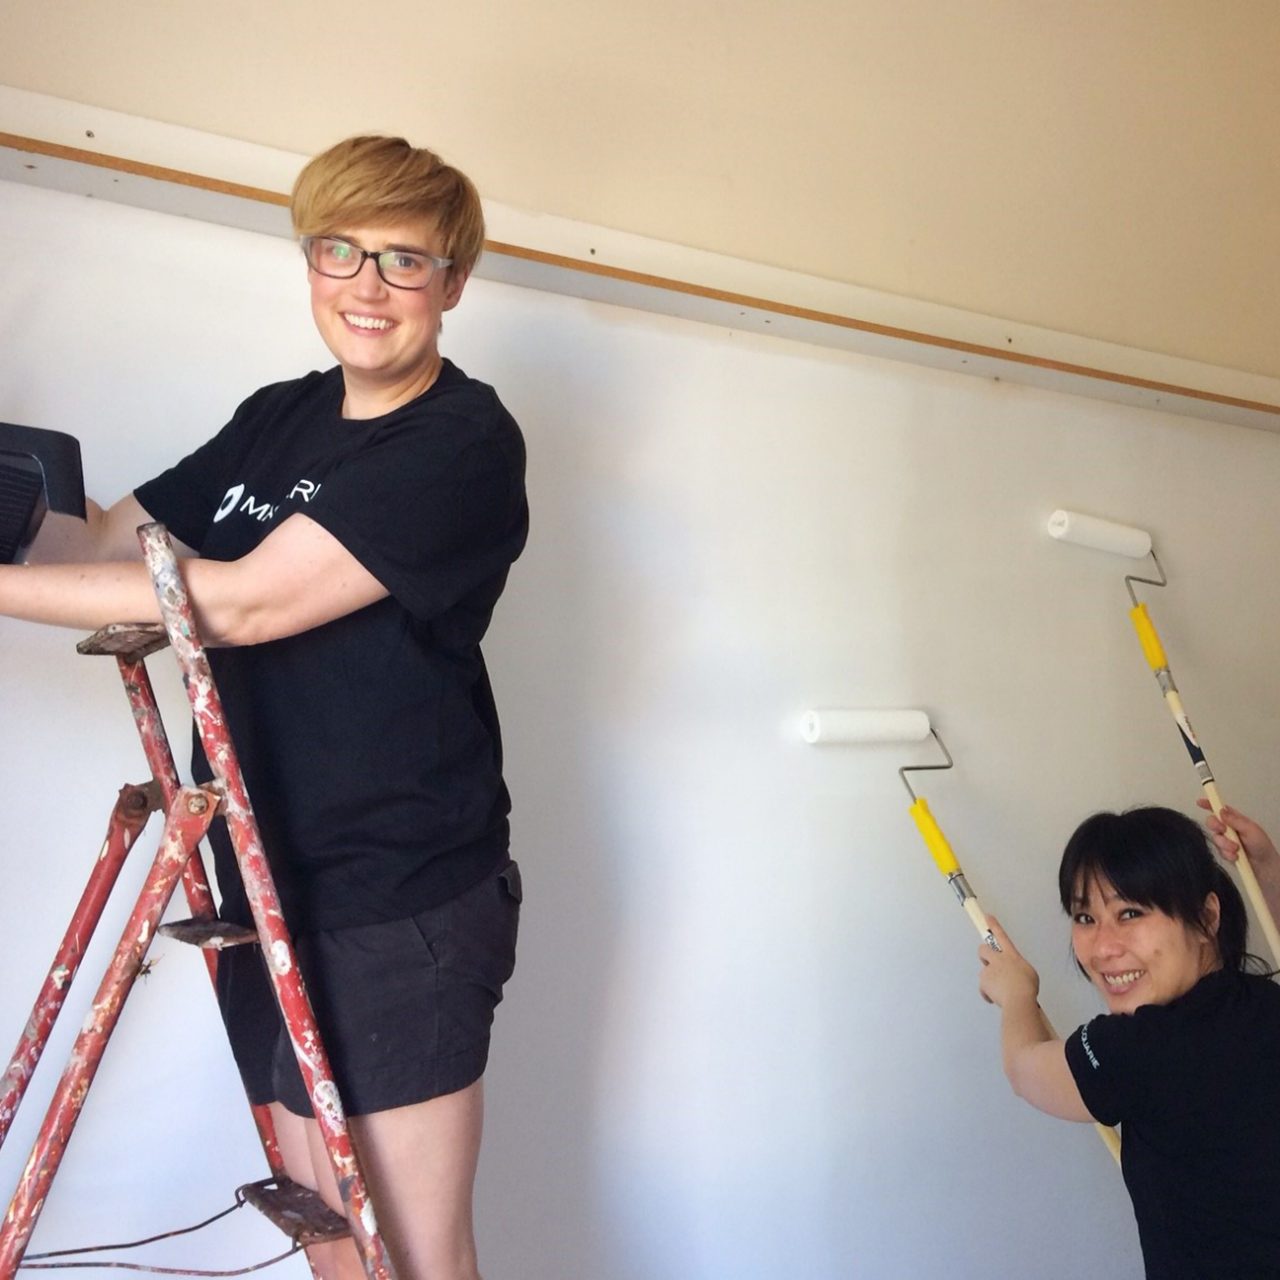 Melbourne staff spent two afternoons painting a room at the Raise Foundation’s Melbourne office